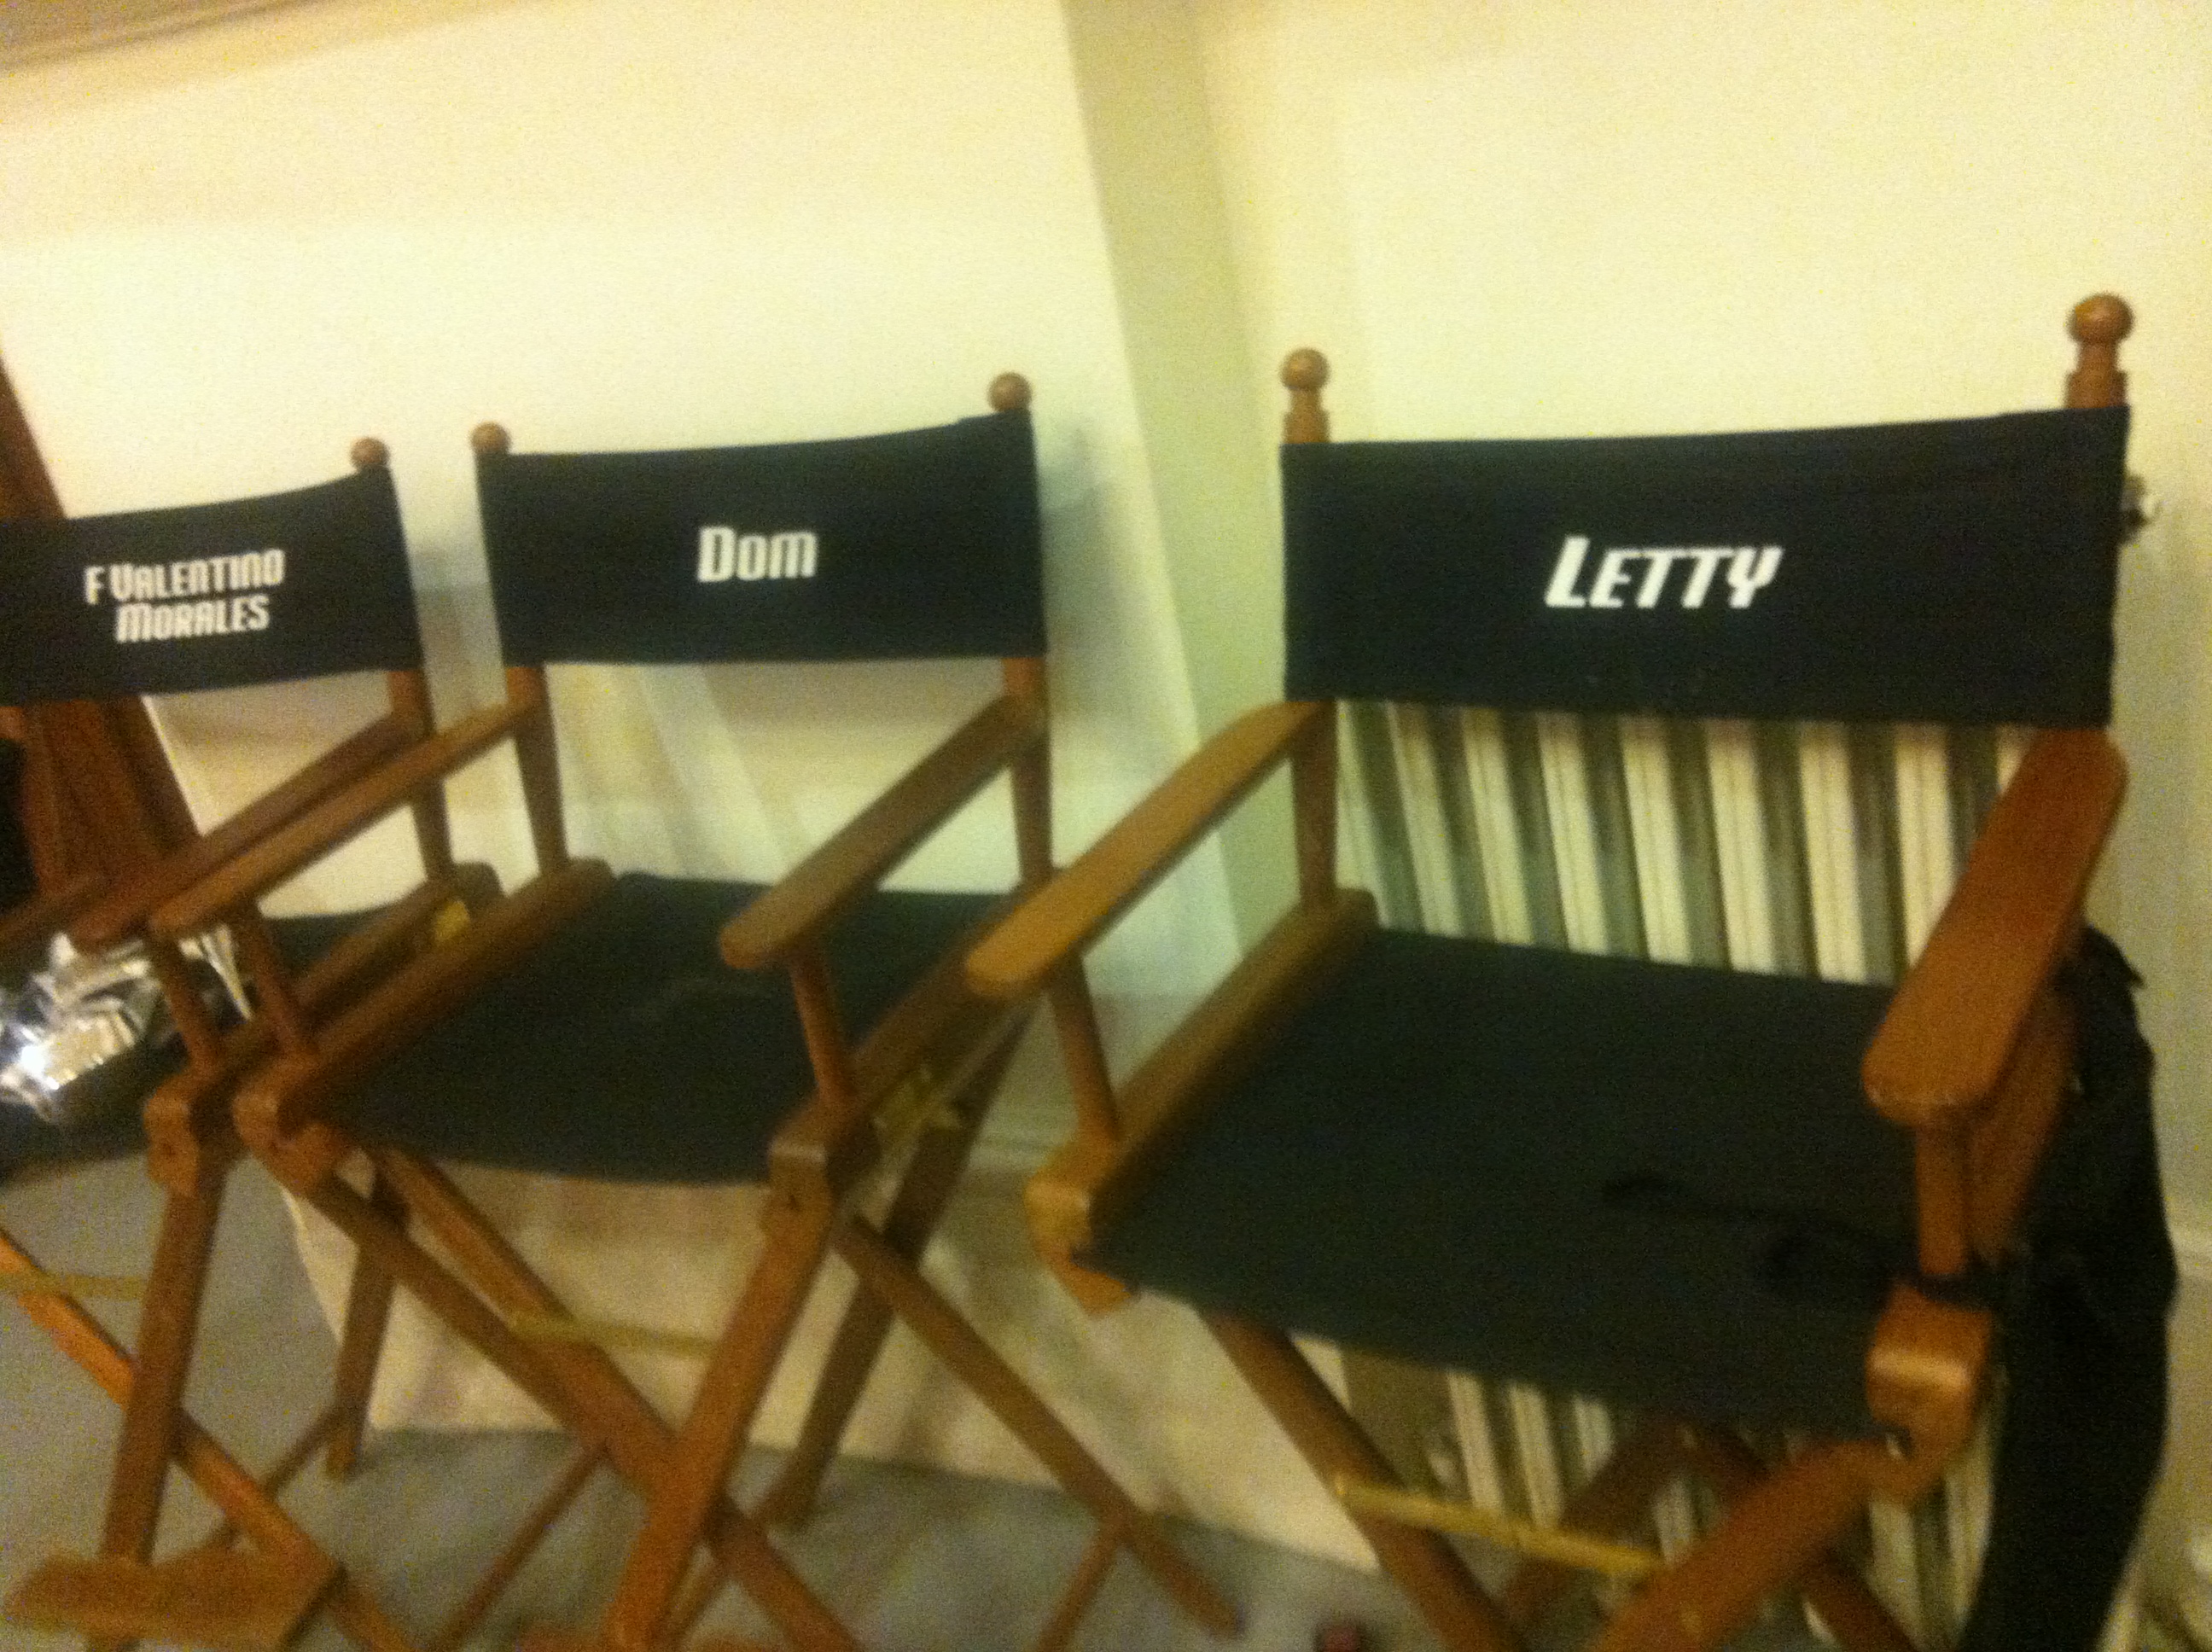 Cast chairs on Fast 6